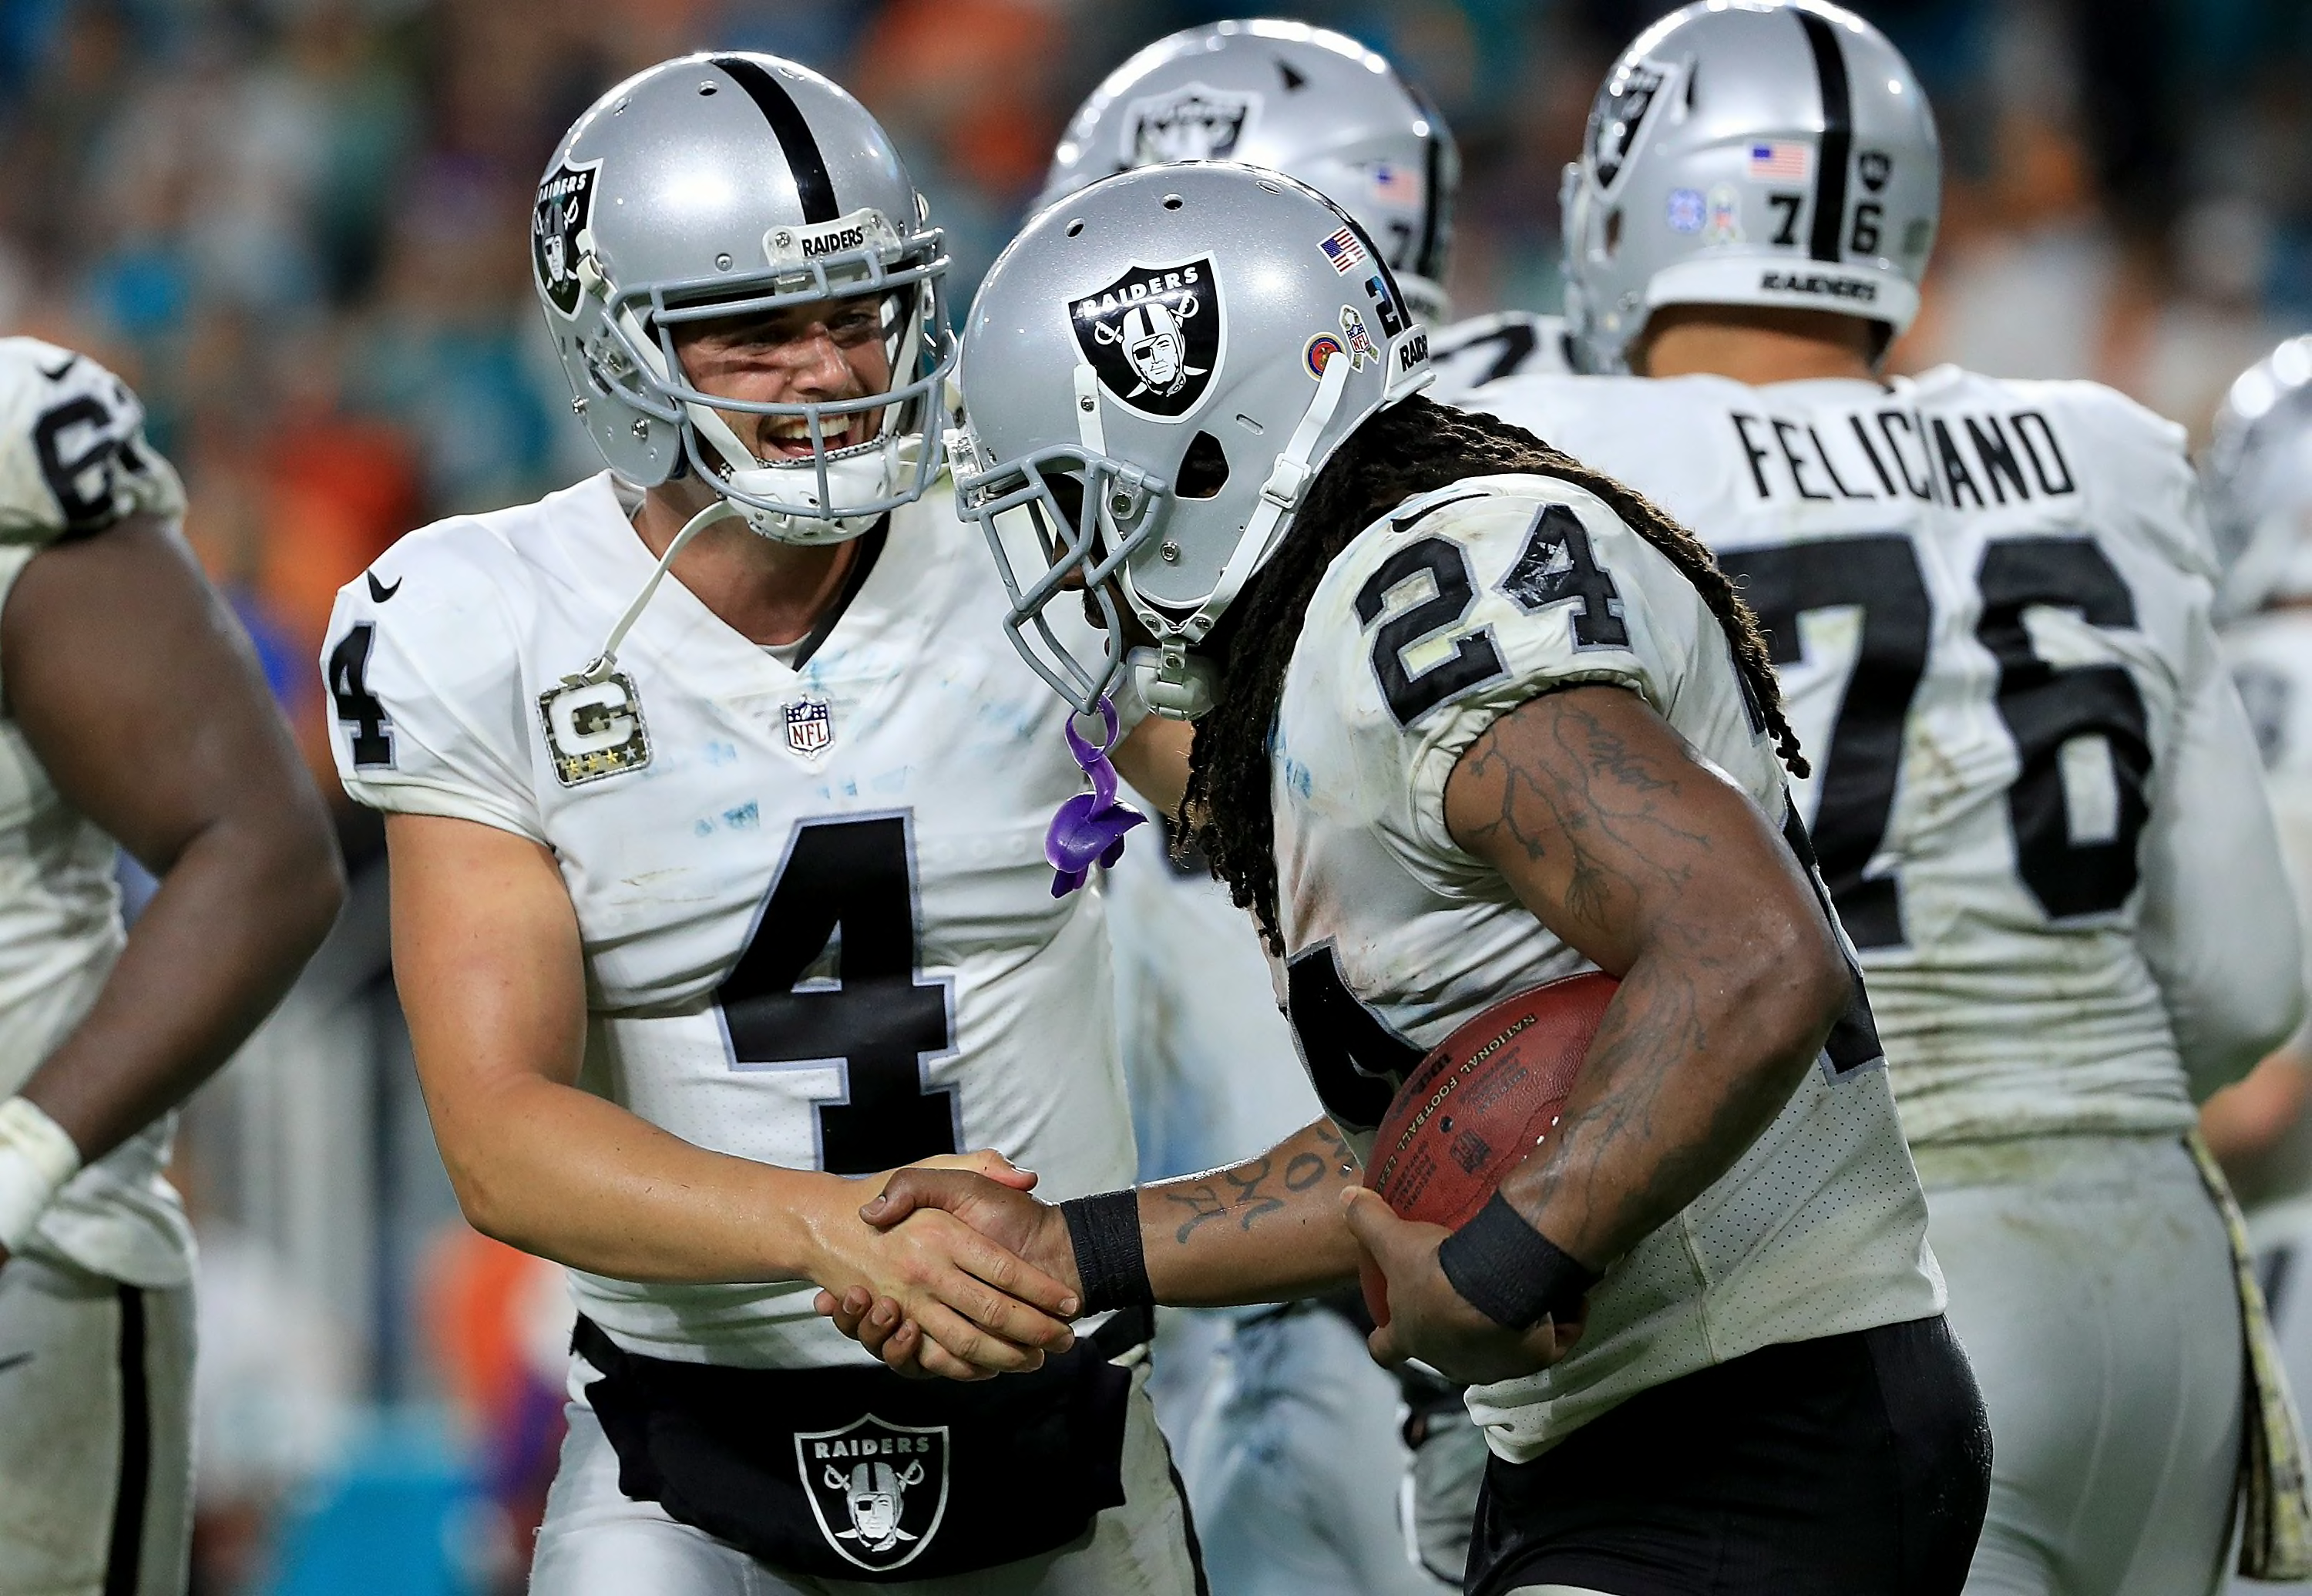 Oakland Raiders: Power ranking the remaining games by difficulty